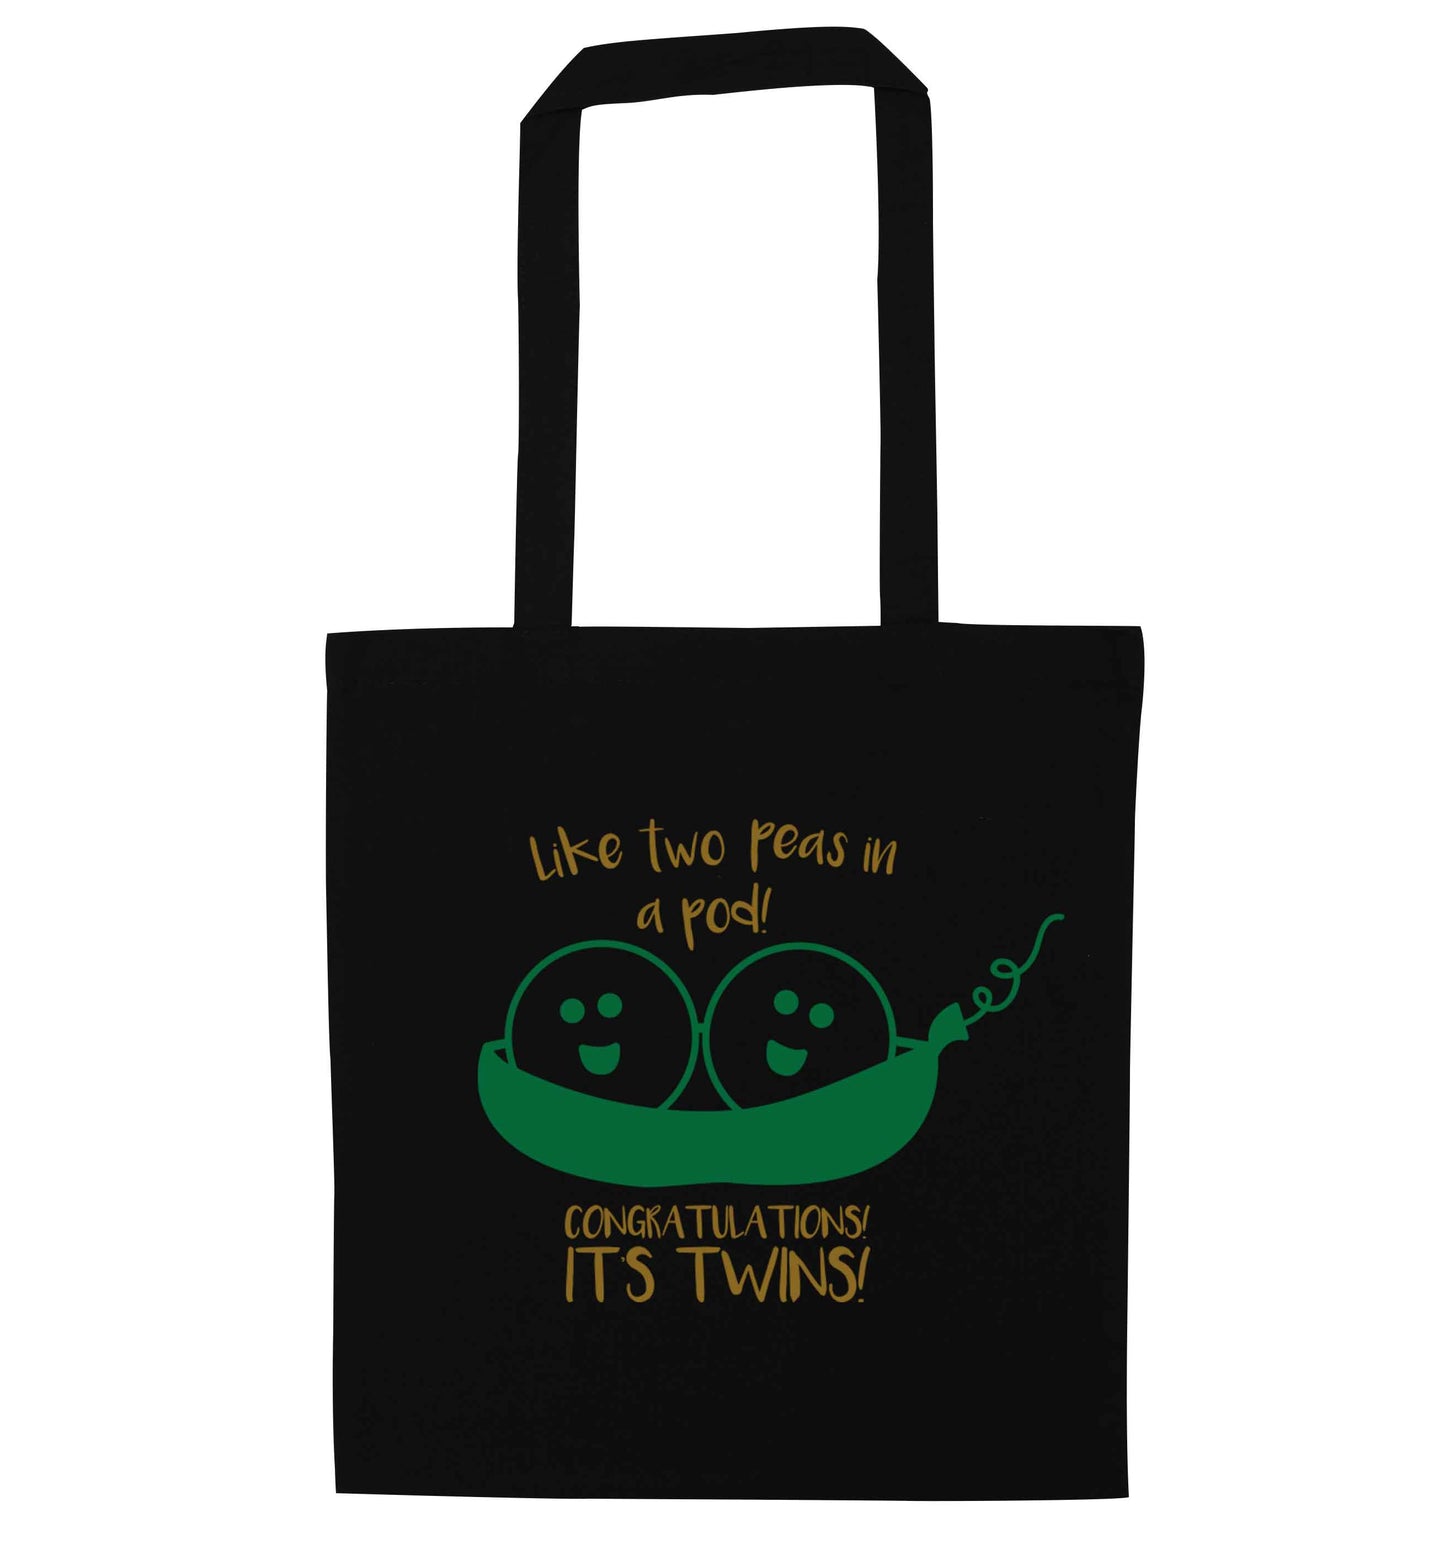 Like two peas in a pod! Congratulations it's twins! black tote bag